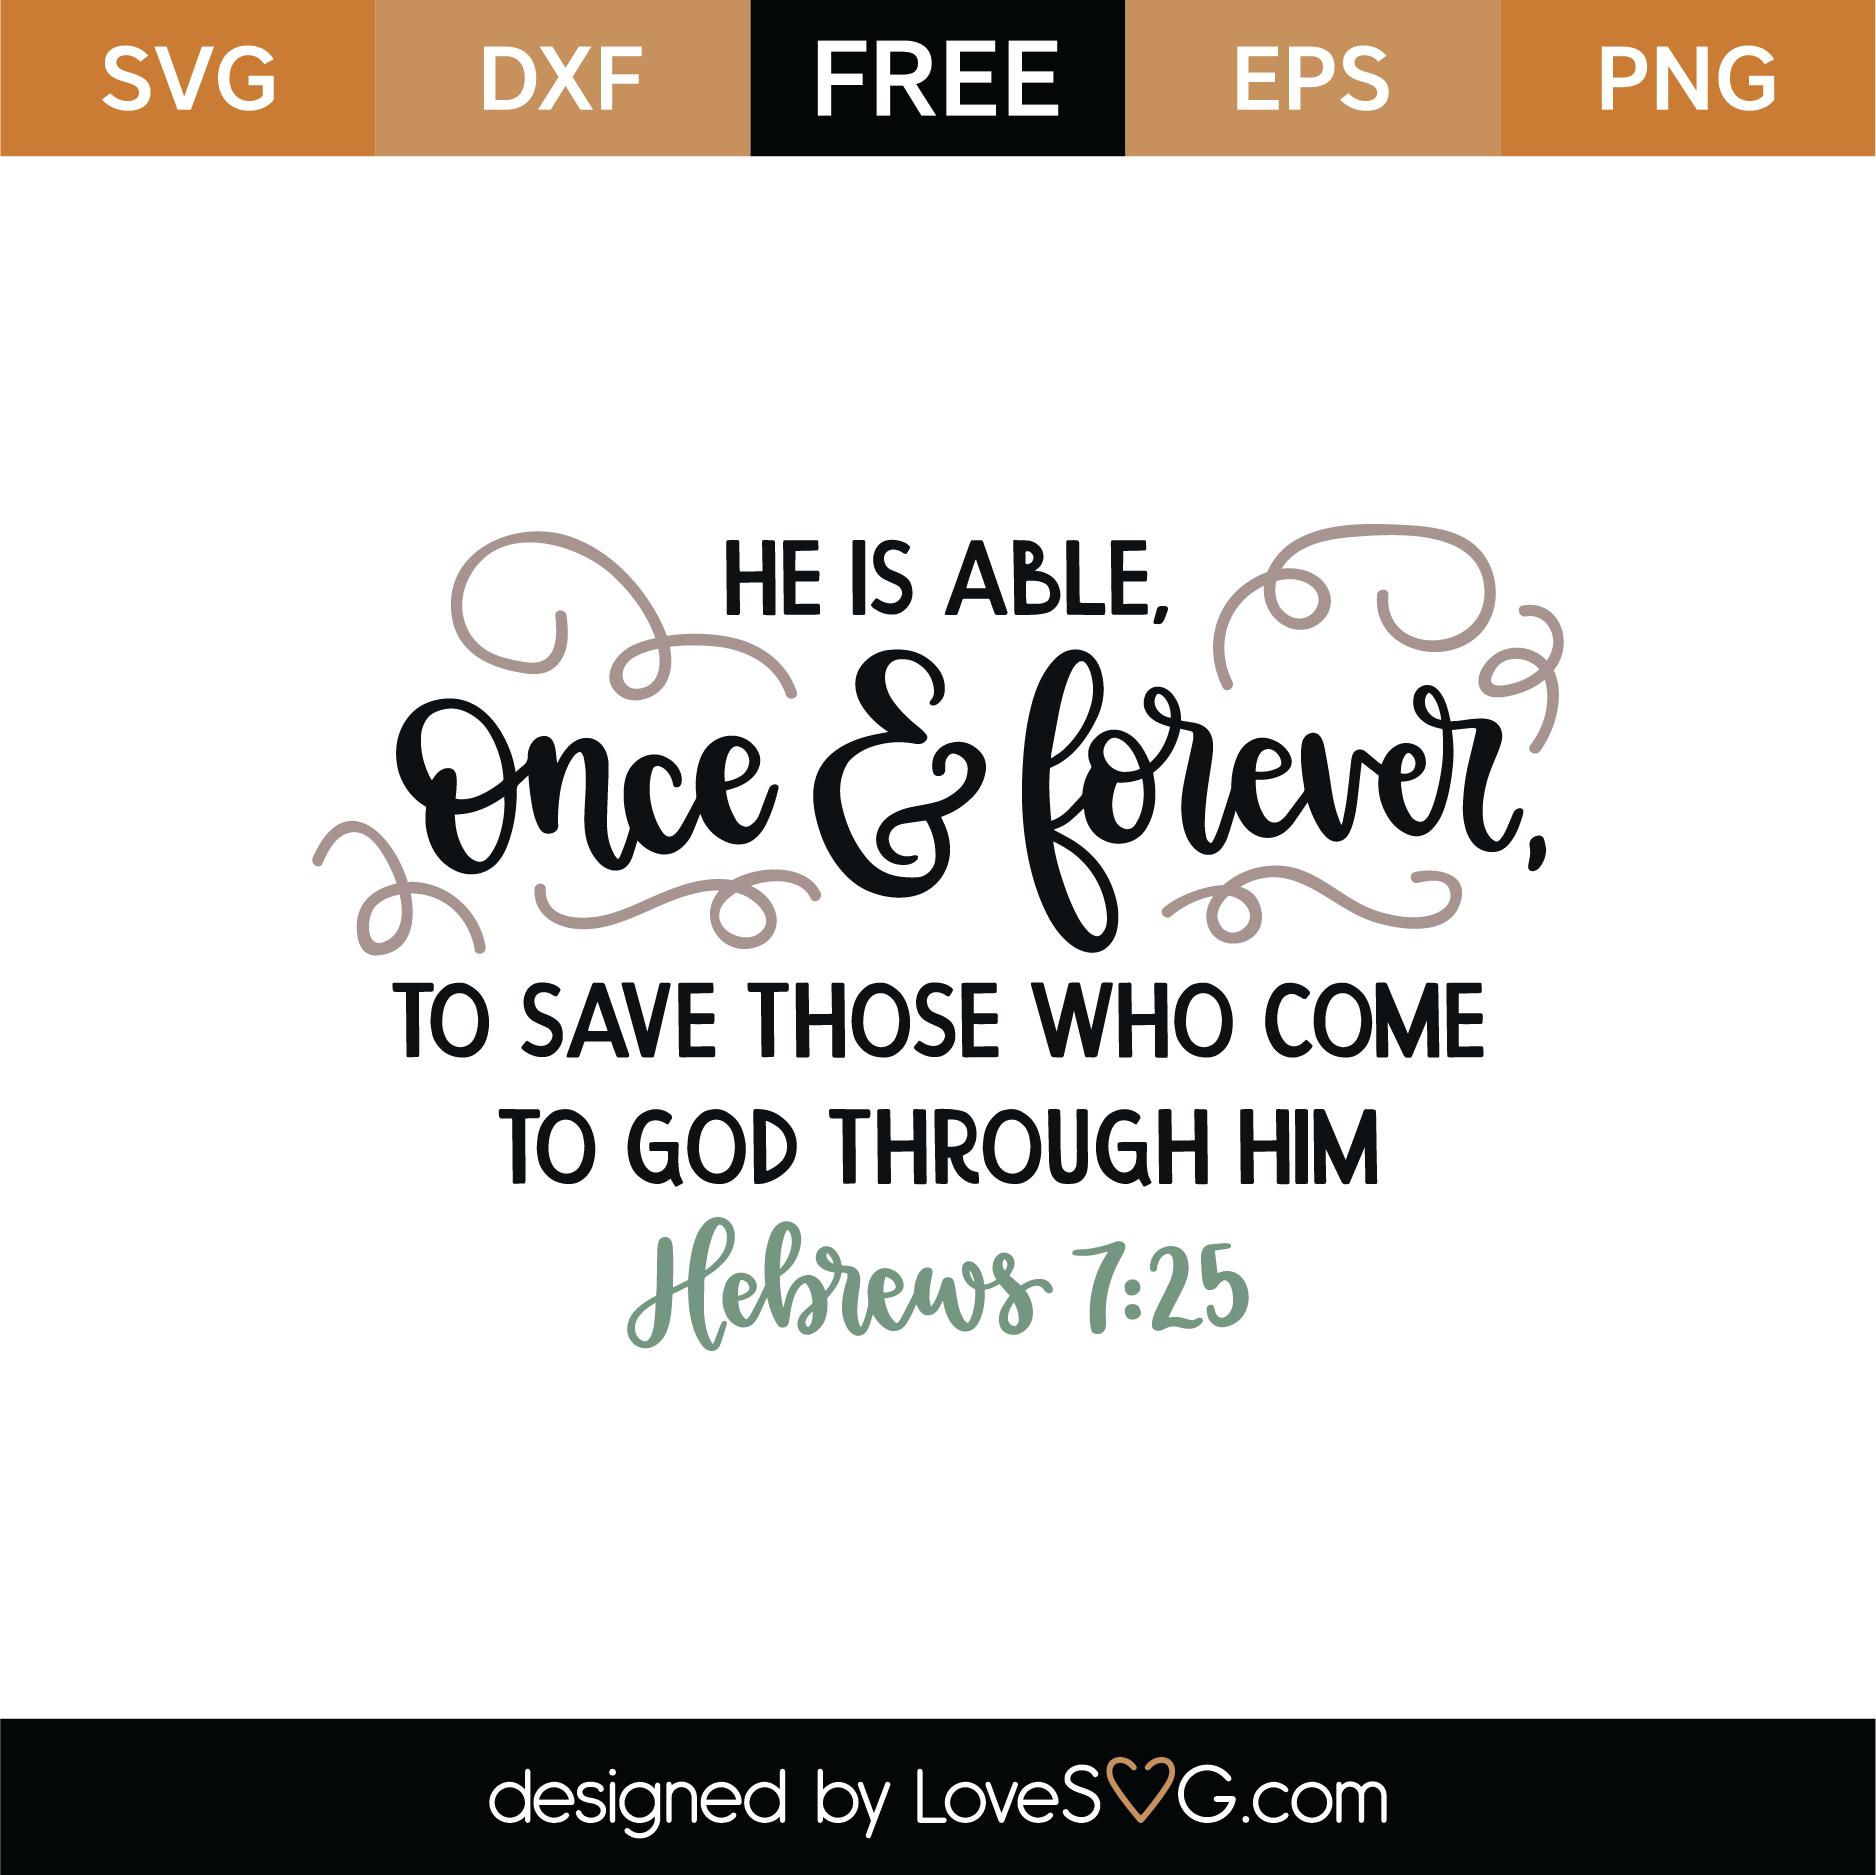 Lovesvg Com On Twitter Today S Free Svgs For Commercial Use Https T Co Jk4wtlcv2d Lovesvg Freesvgcutfiles Svgcutfiles